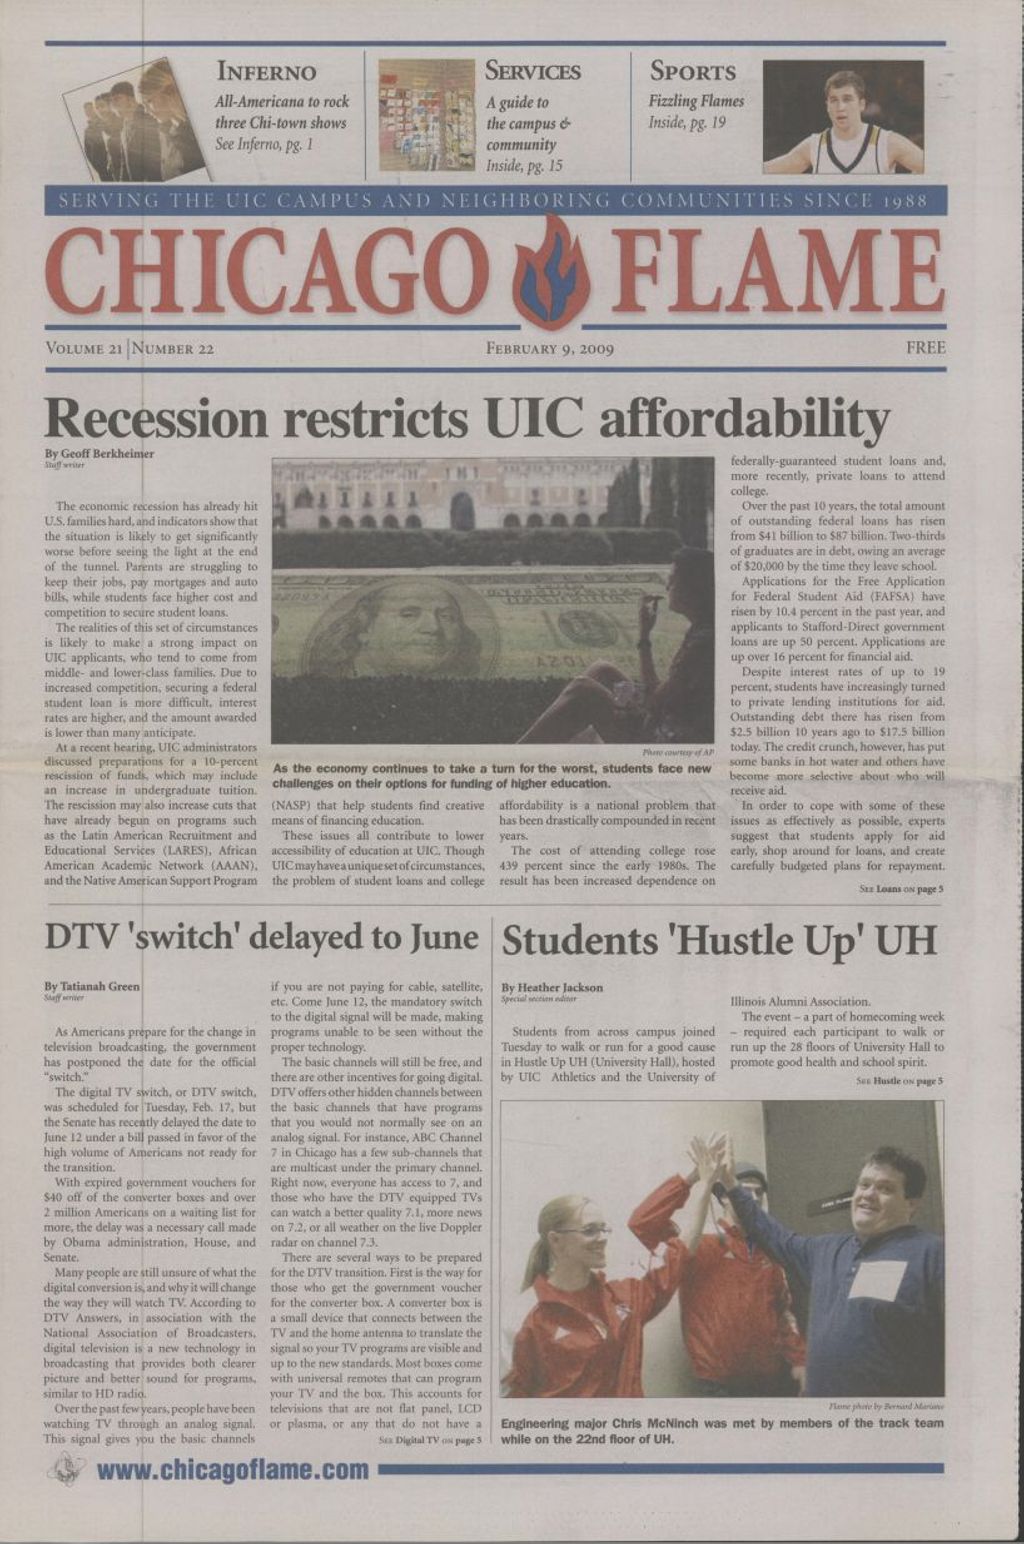 Miniature of Chicago Flame (February 9, 2009)